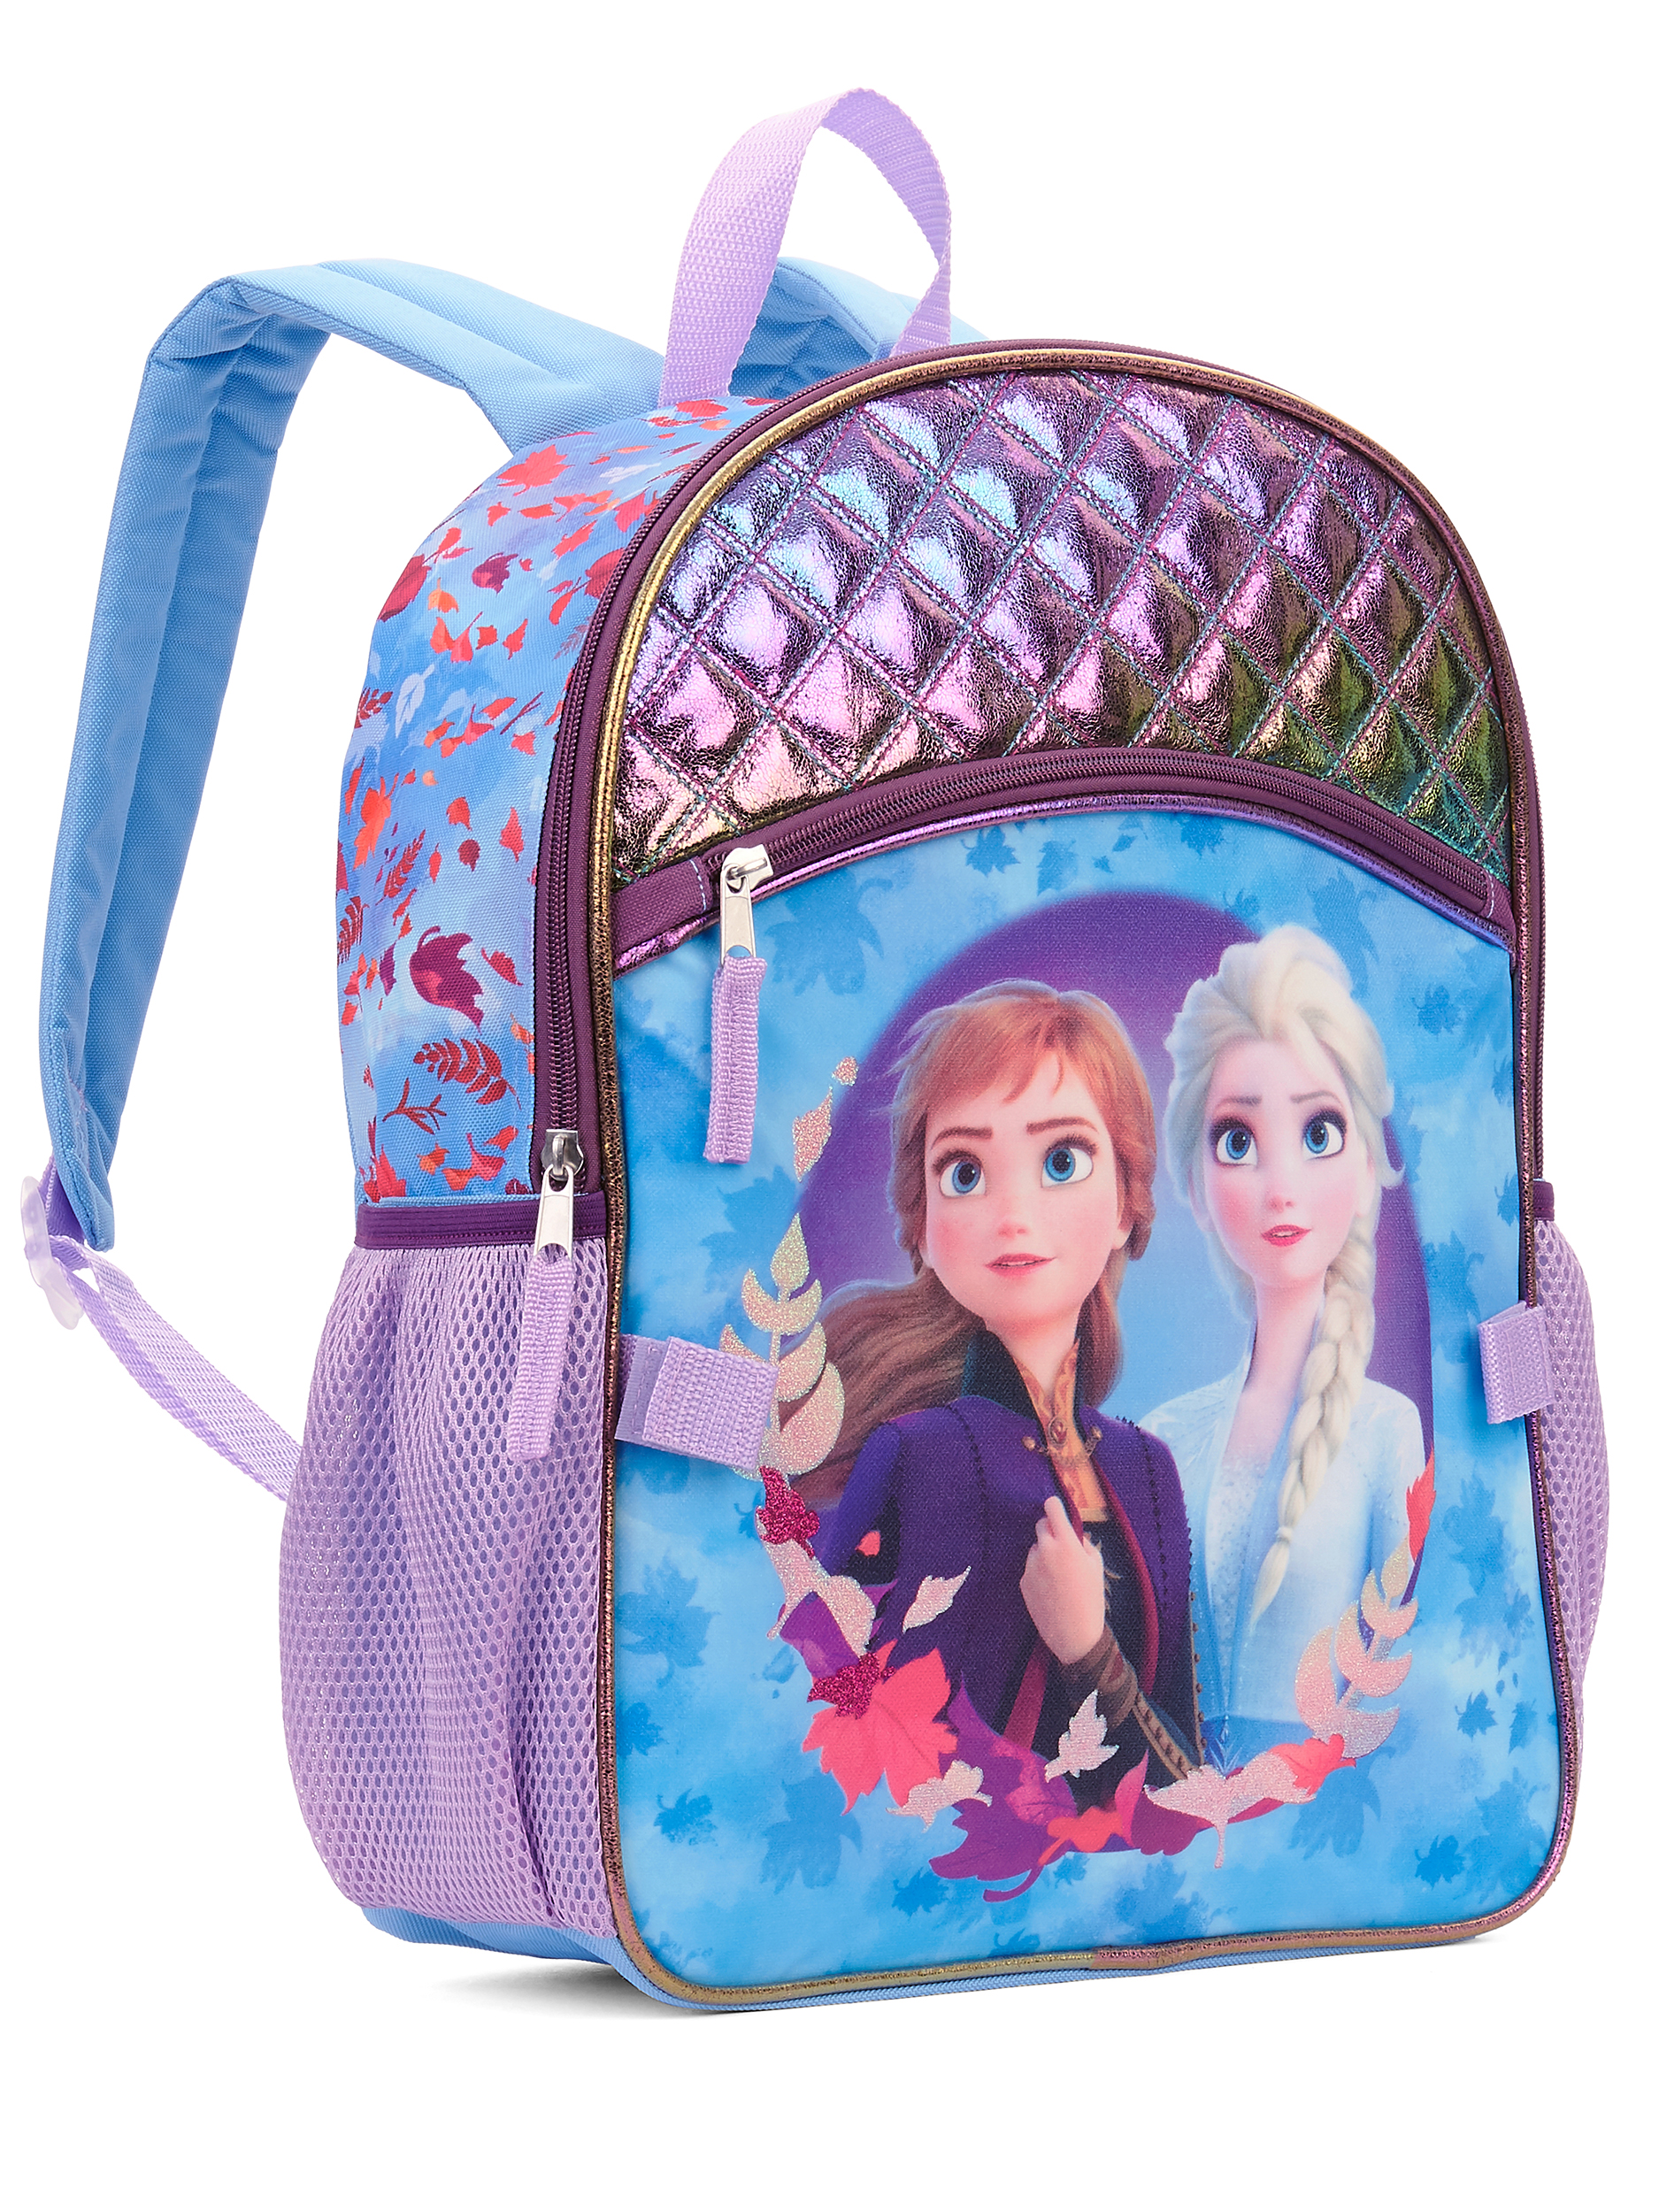 Disney Frozen 2 Elsa And Anna Girls' Purple Blue Backpack with Lunch Bag - image 2 of 3